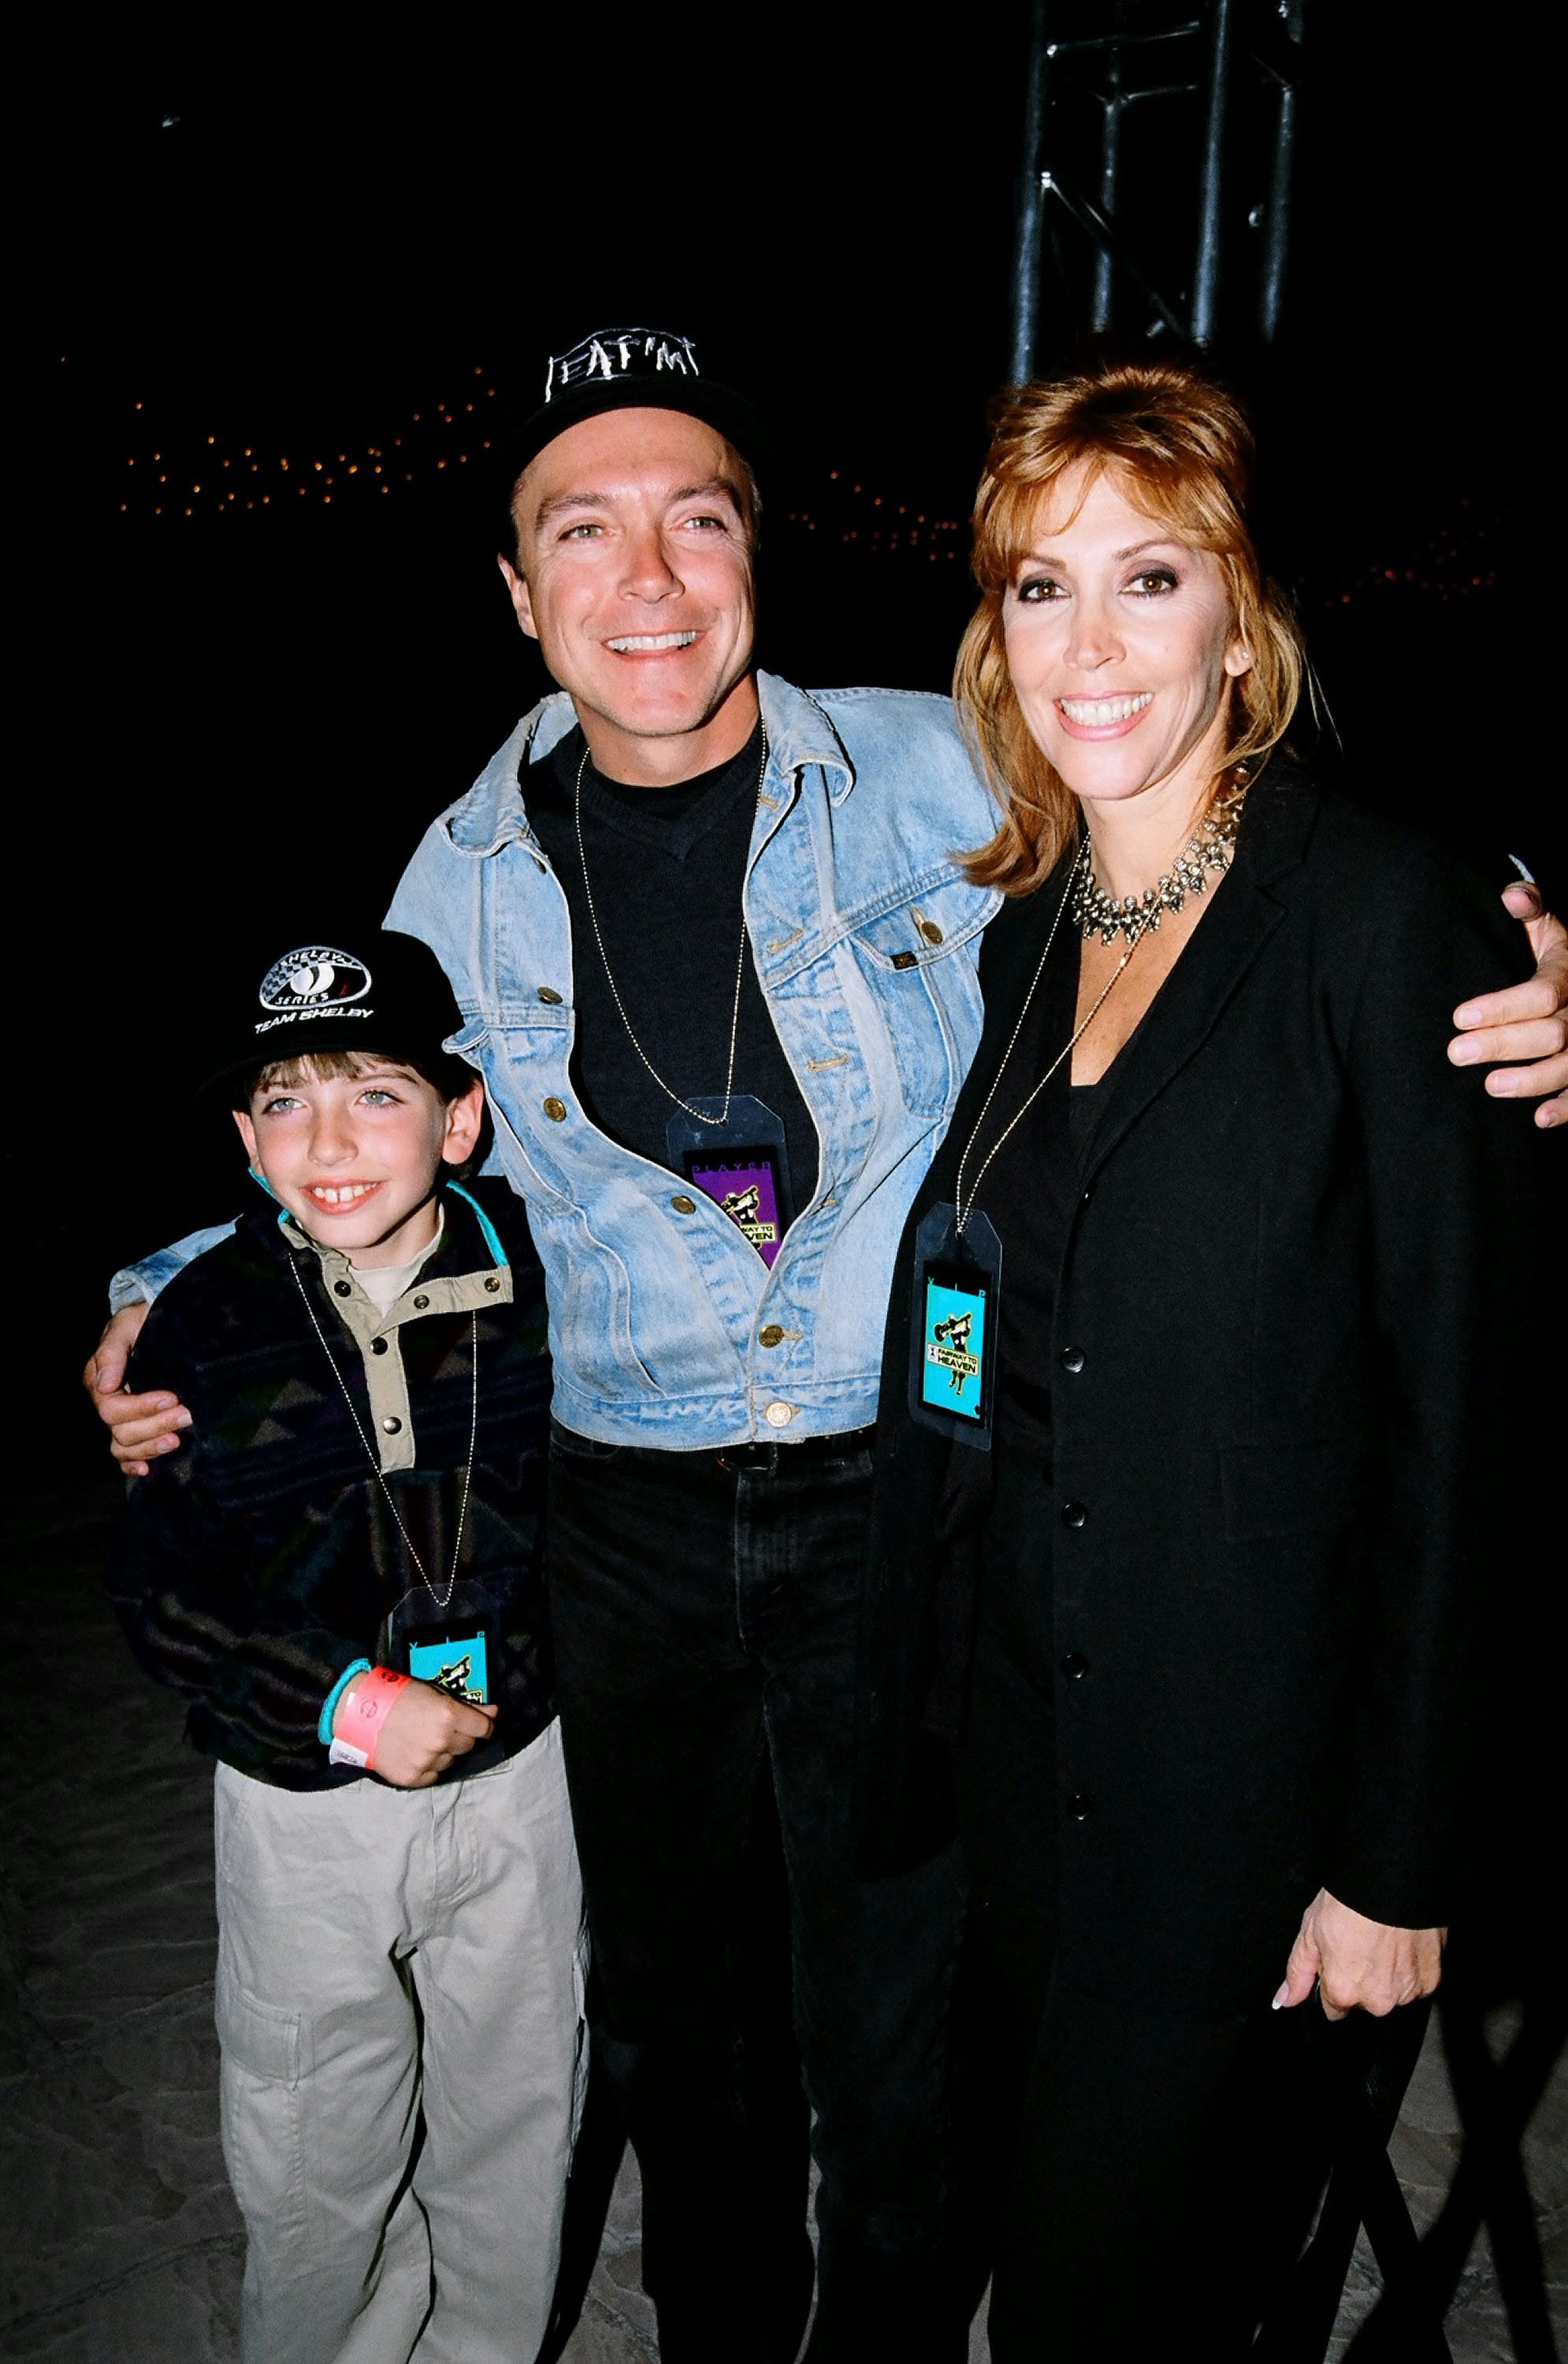 Beau Cassidy, David Cassidy and Sue Shifrin at he 1998 Fairway to Heaven Golf Tournament, Las Vegas, Nevada. | Photo: Getty Images